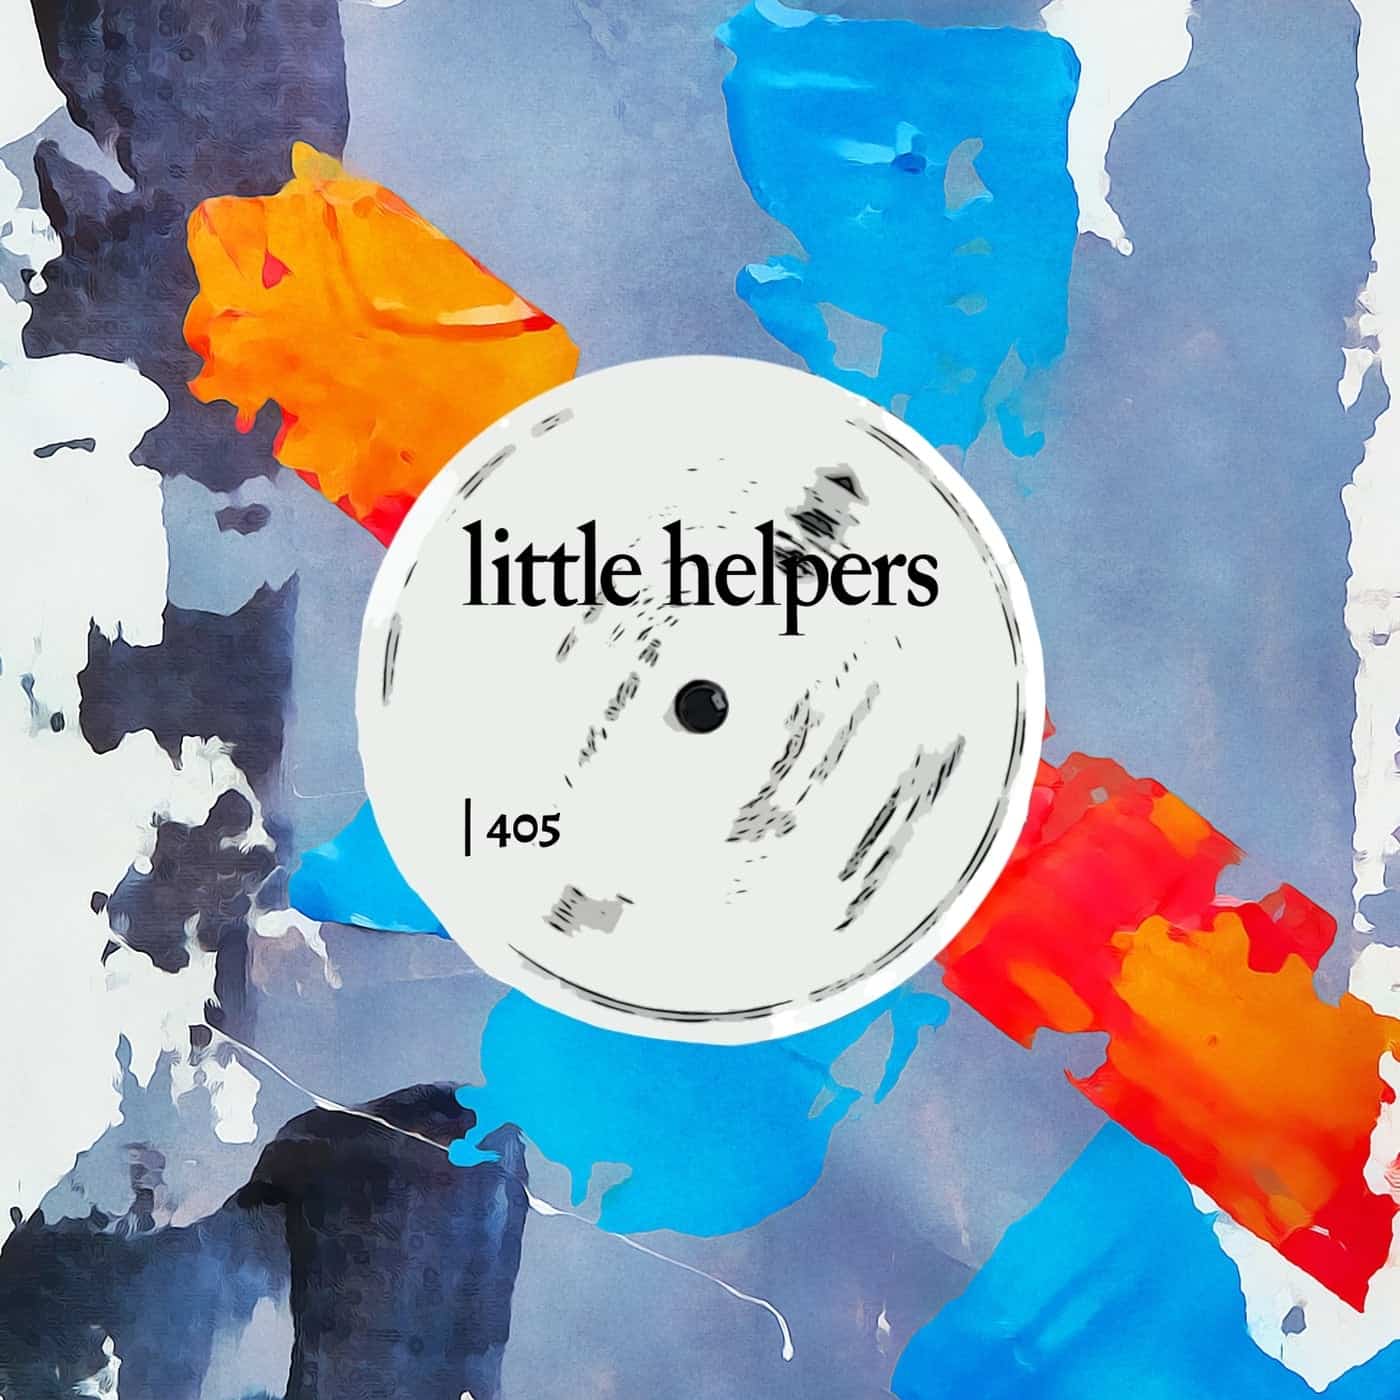 image cover: Little Helpers 405 by Butane, Phonotrip on Little Helpers